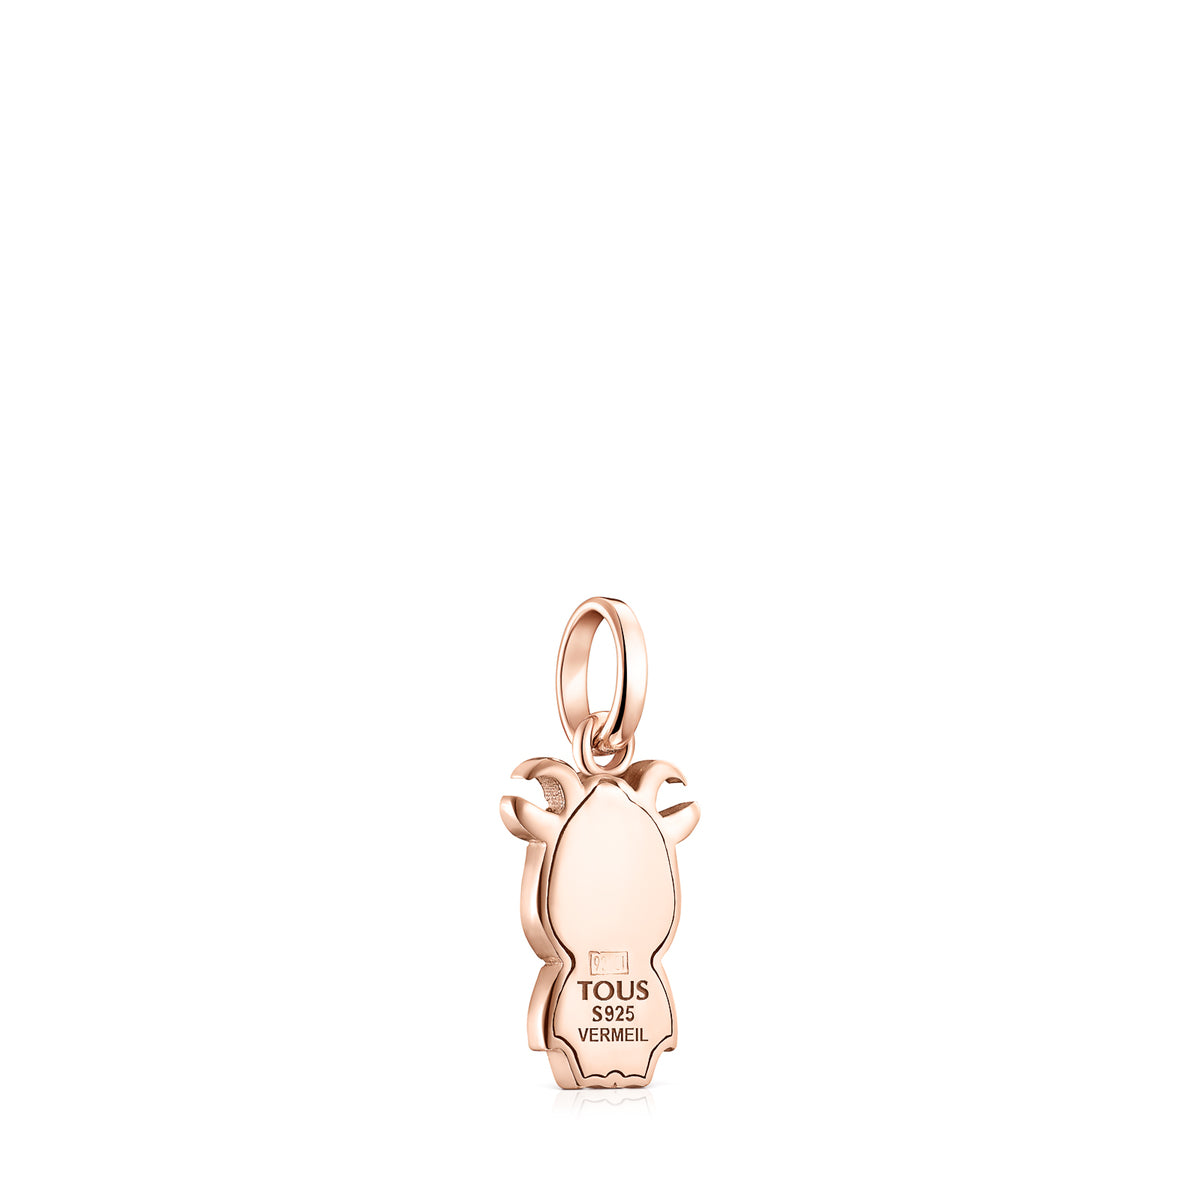 Tous Chinese Horoscope Goat Pendant in Rose Gold Vermeil with Spinel 918434530